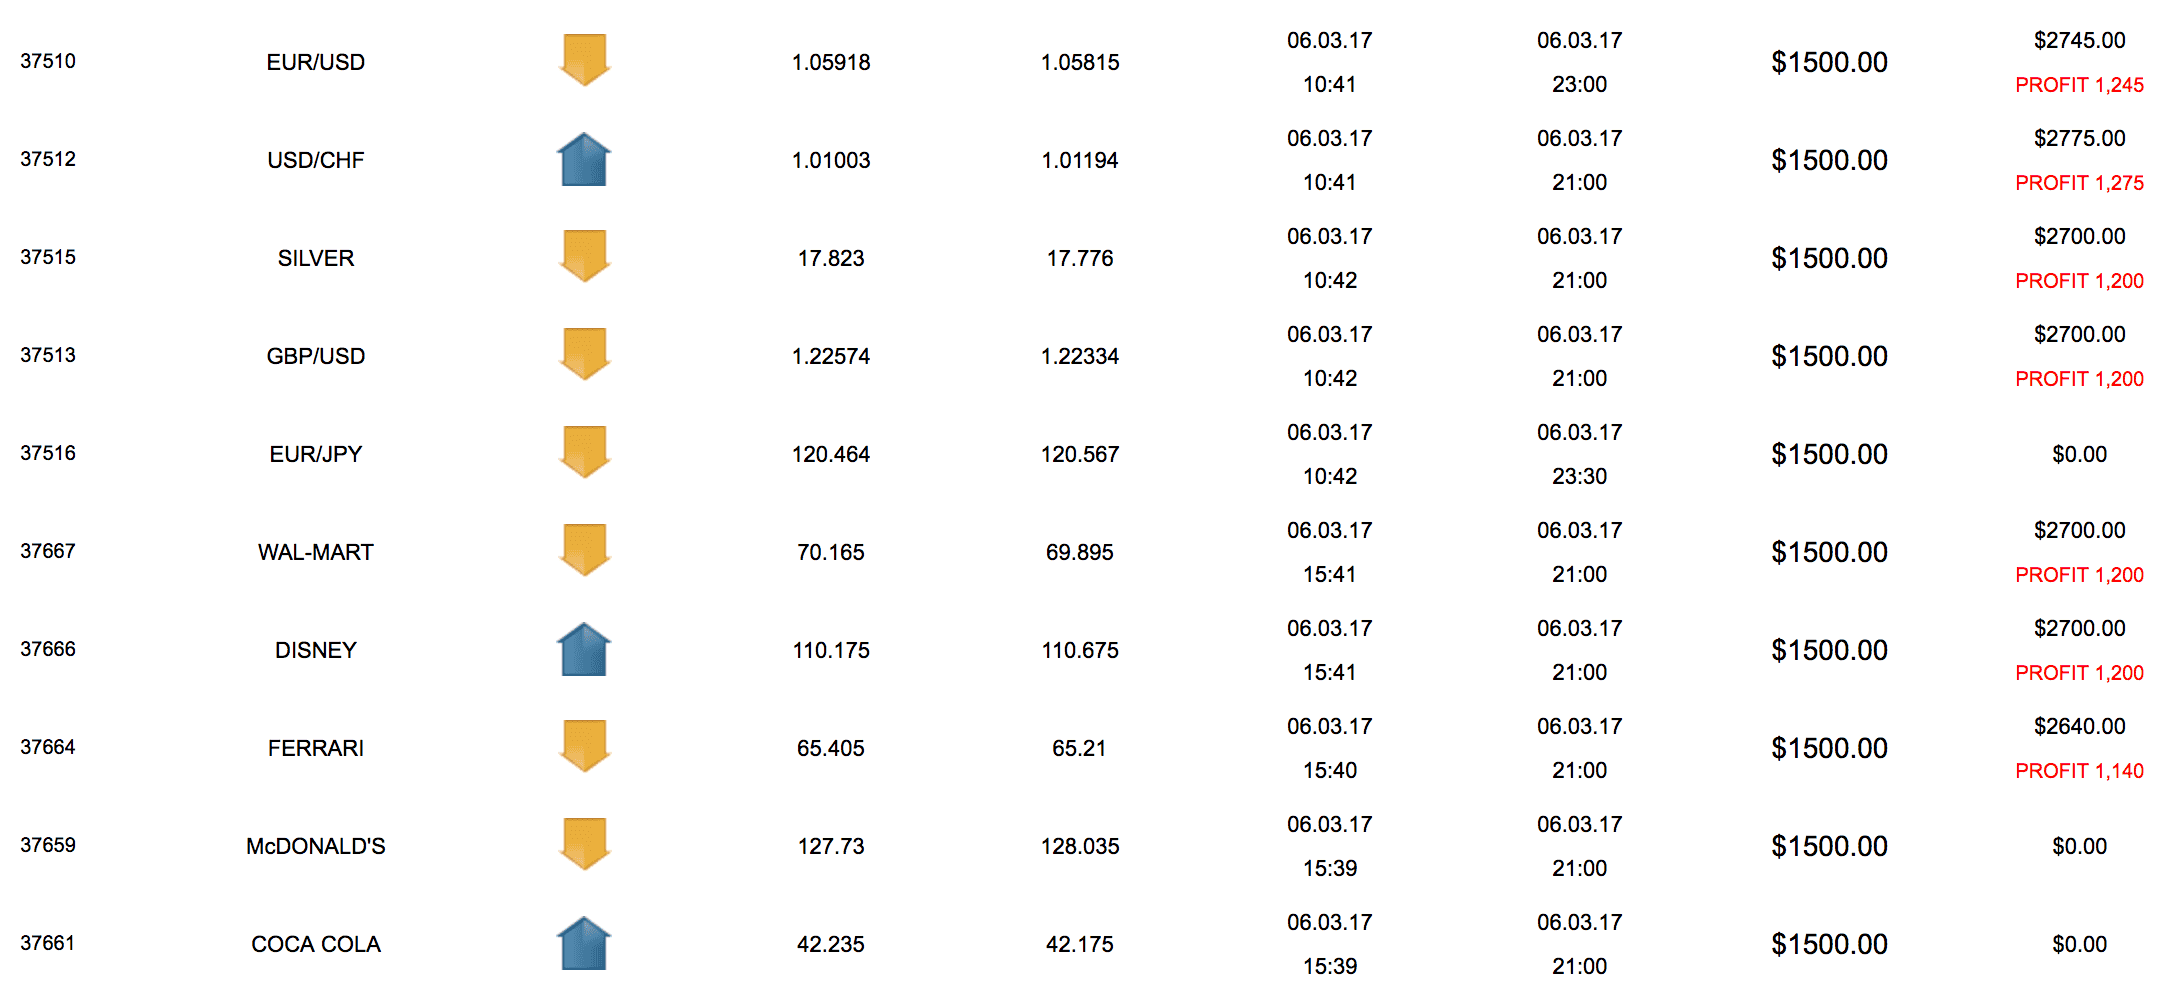 Trading results - 06.03.2017